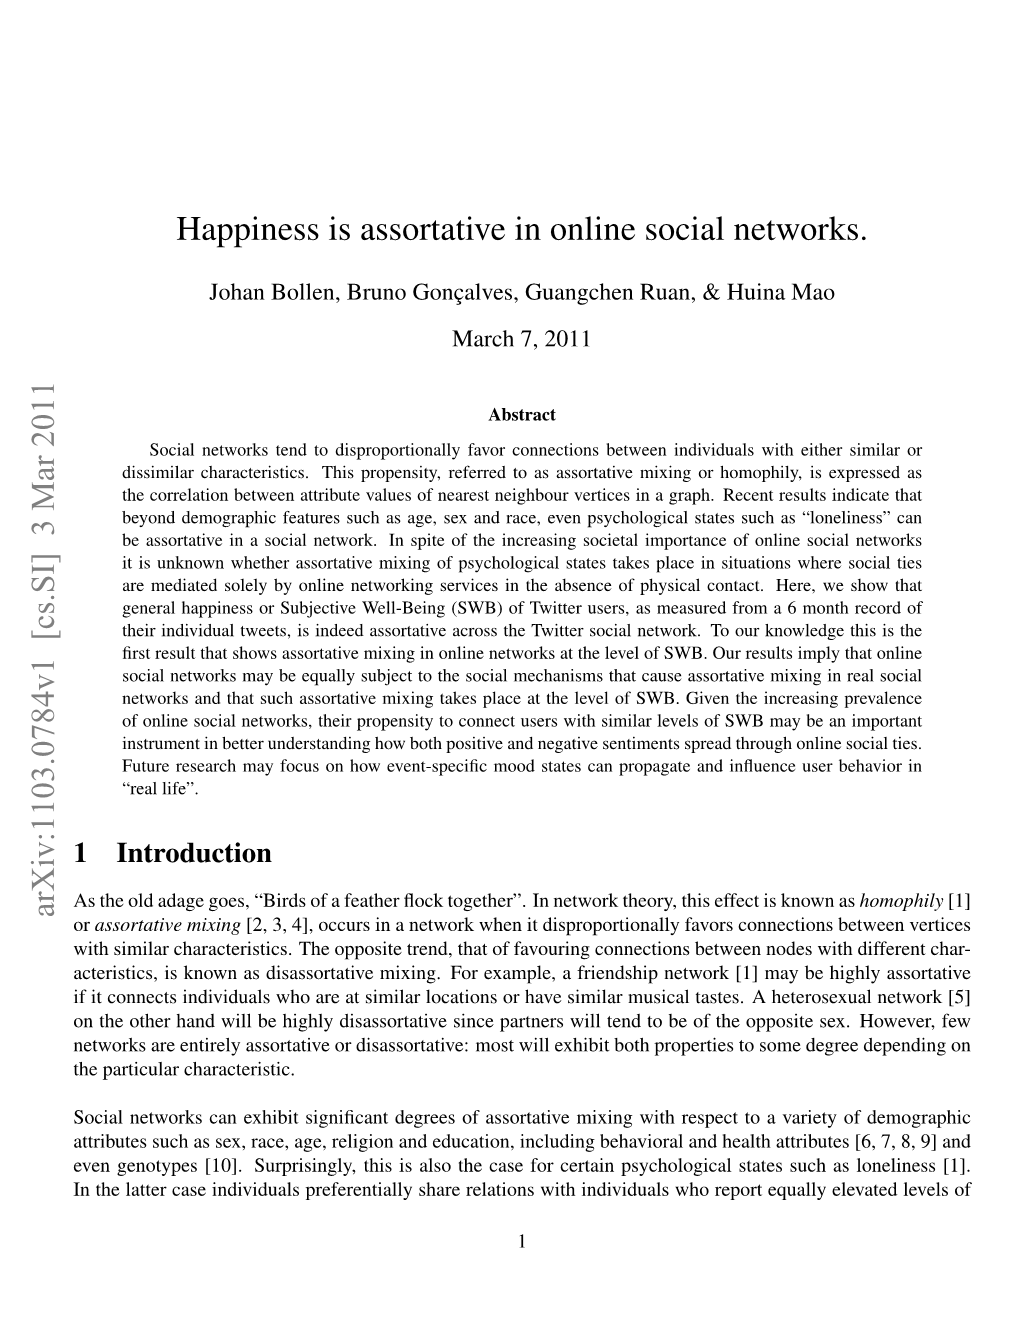 Happiness Is Assortative in Online Social Networks. Arxiv:1103.0784V1